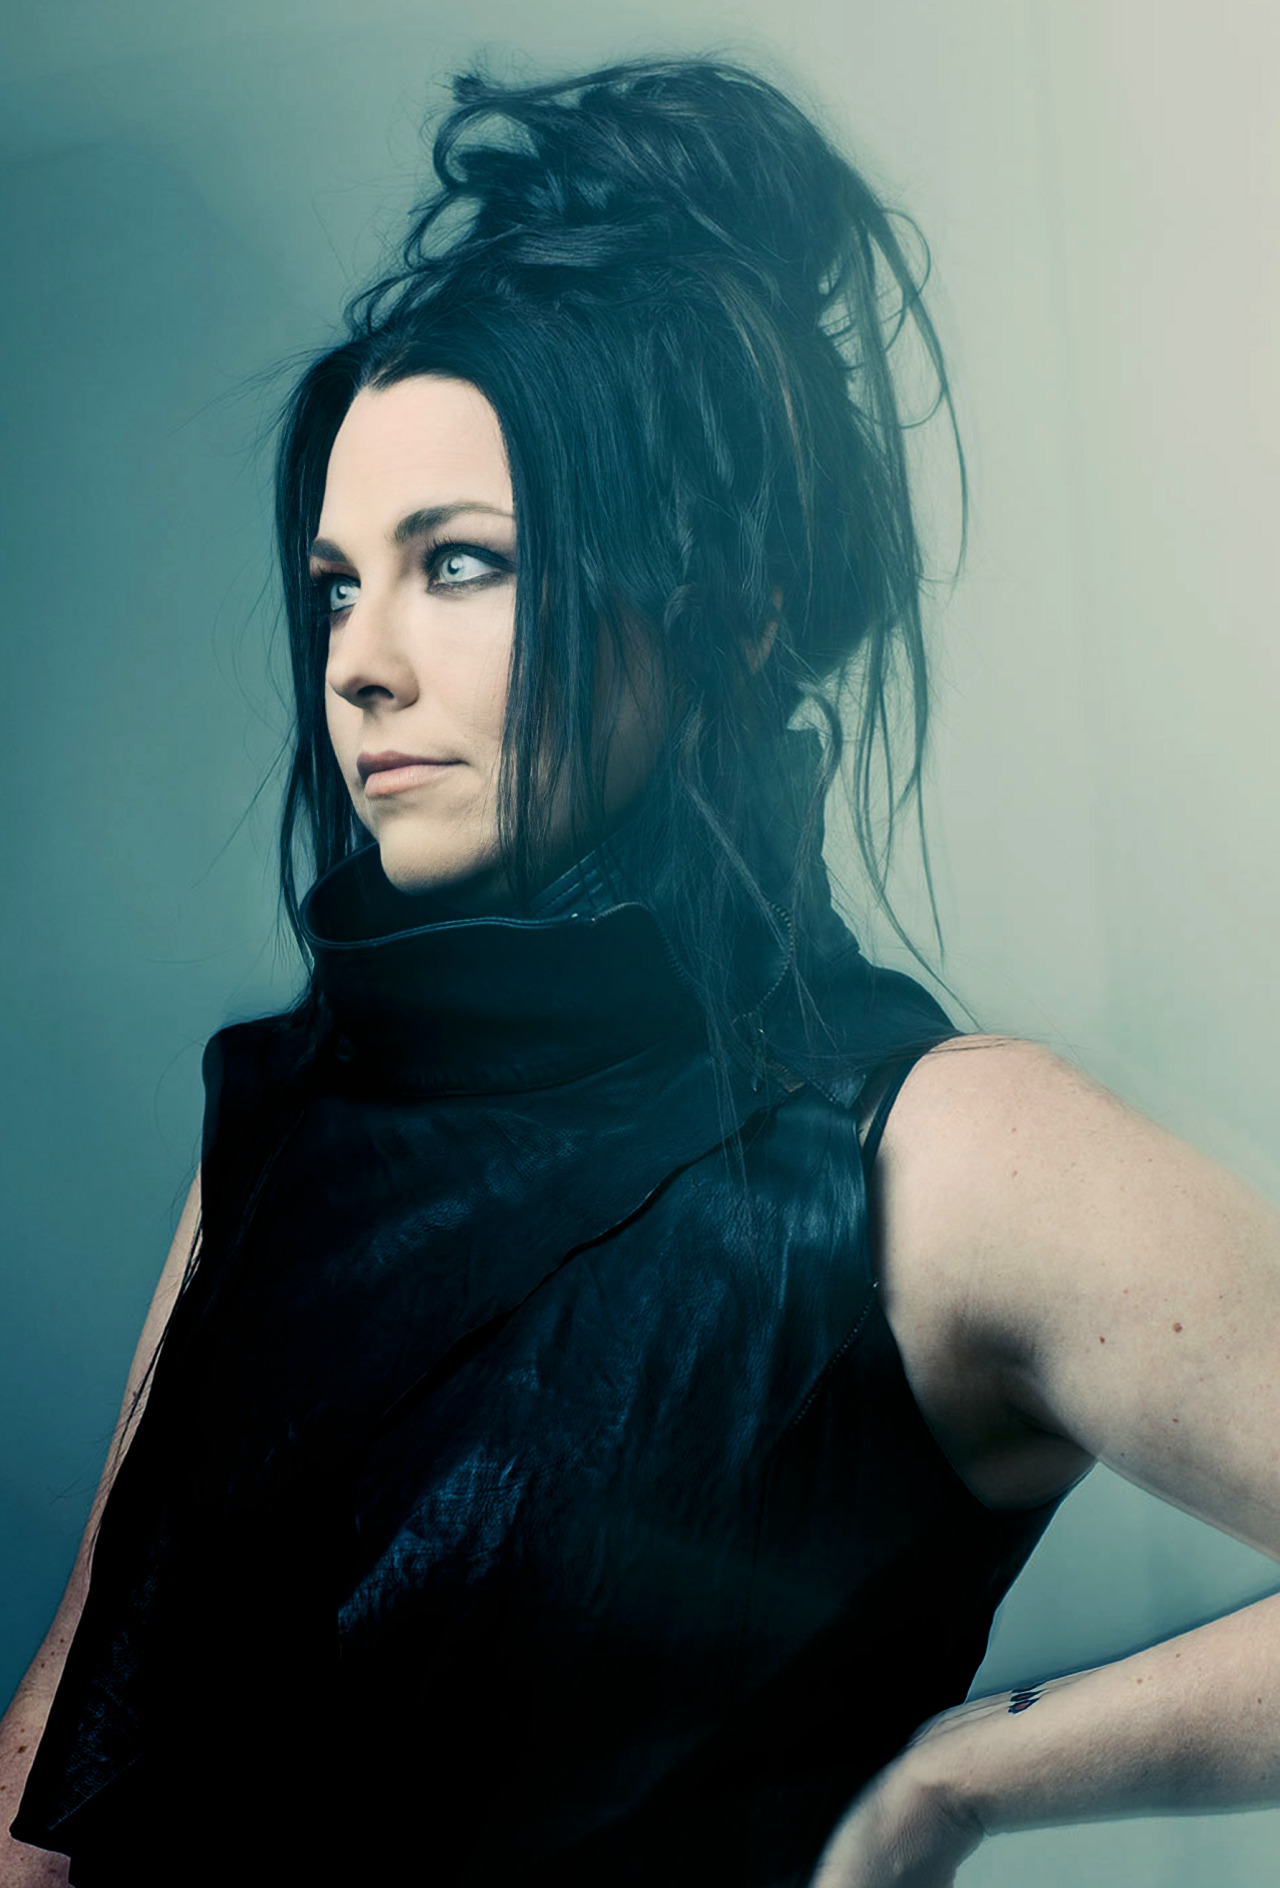 1280x1888
Keywords: amy lee;blue;photoshoot;the bitter truth;sesion;hq